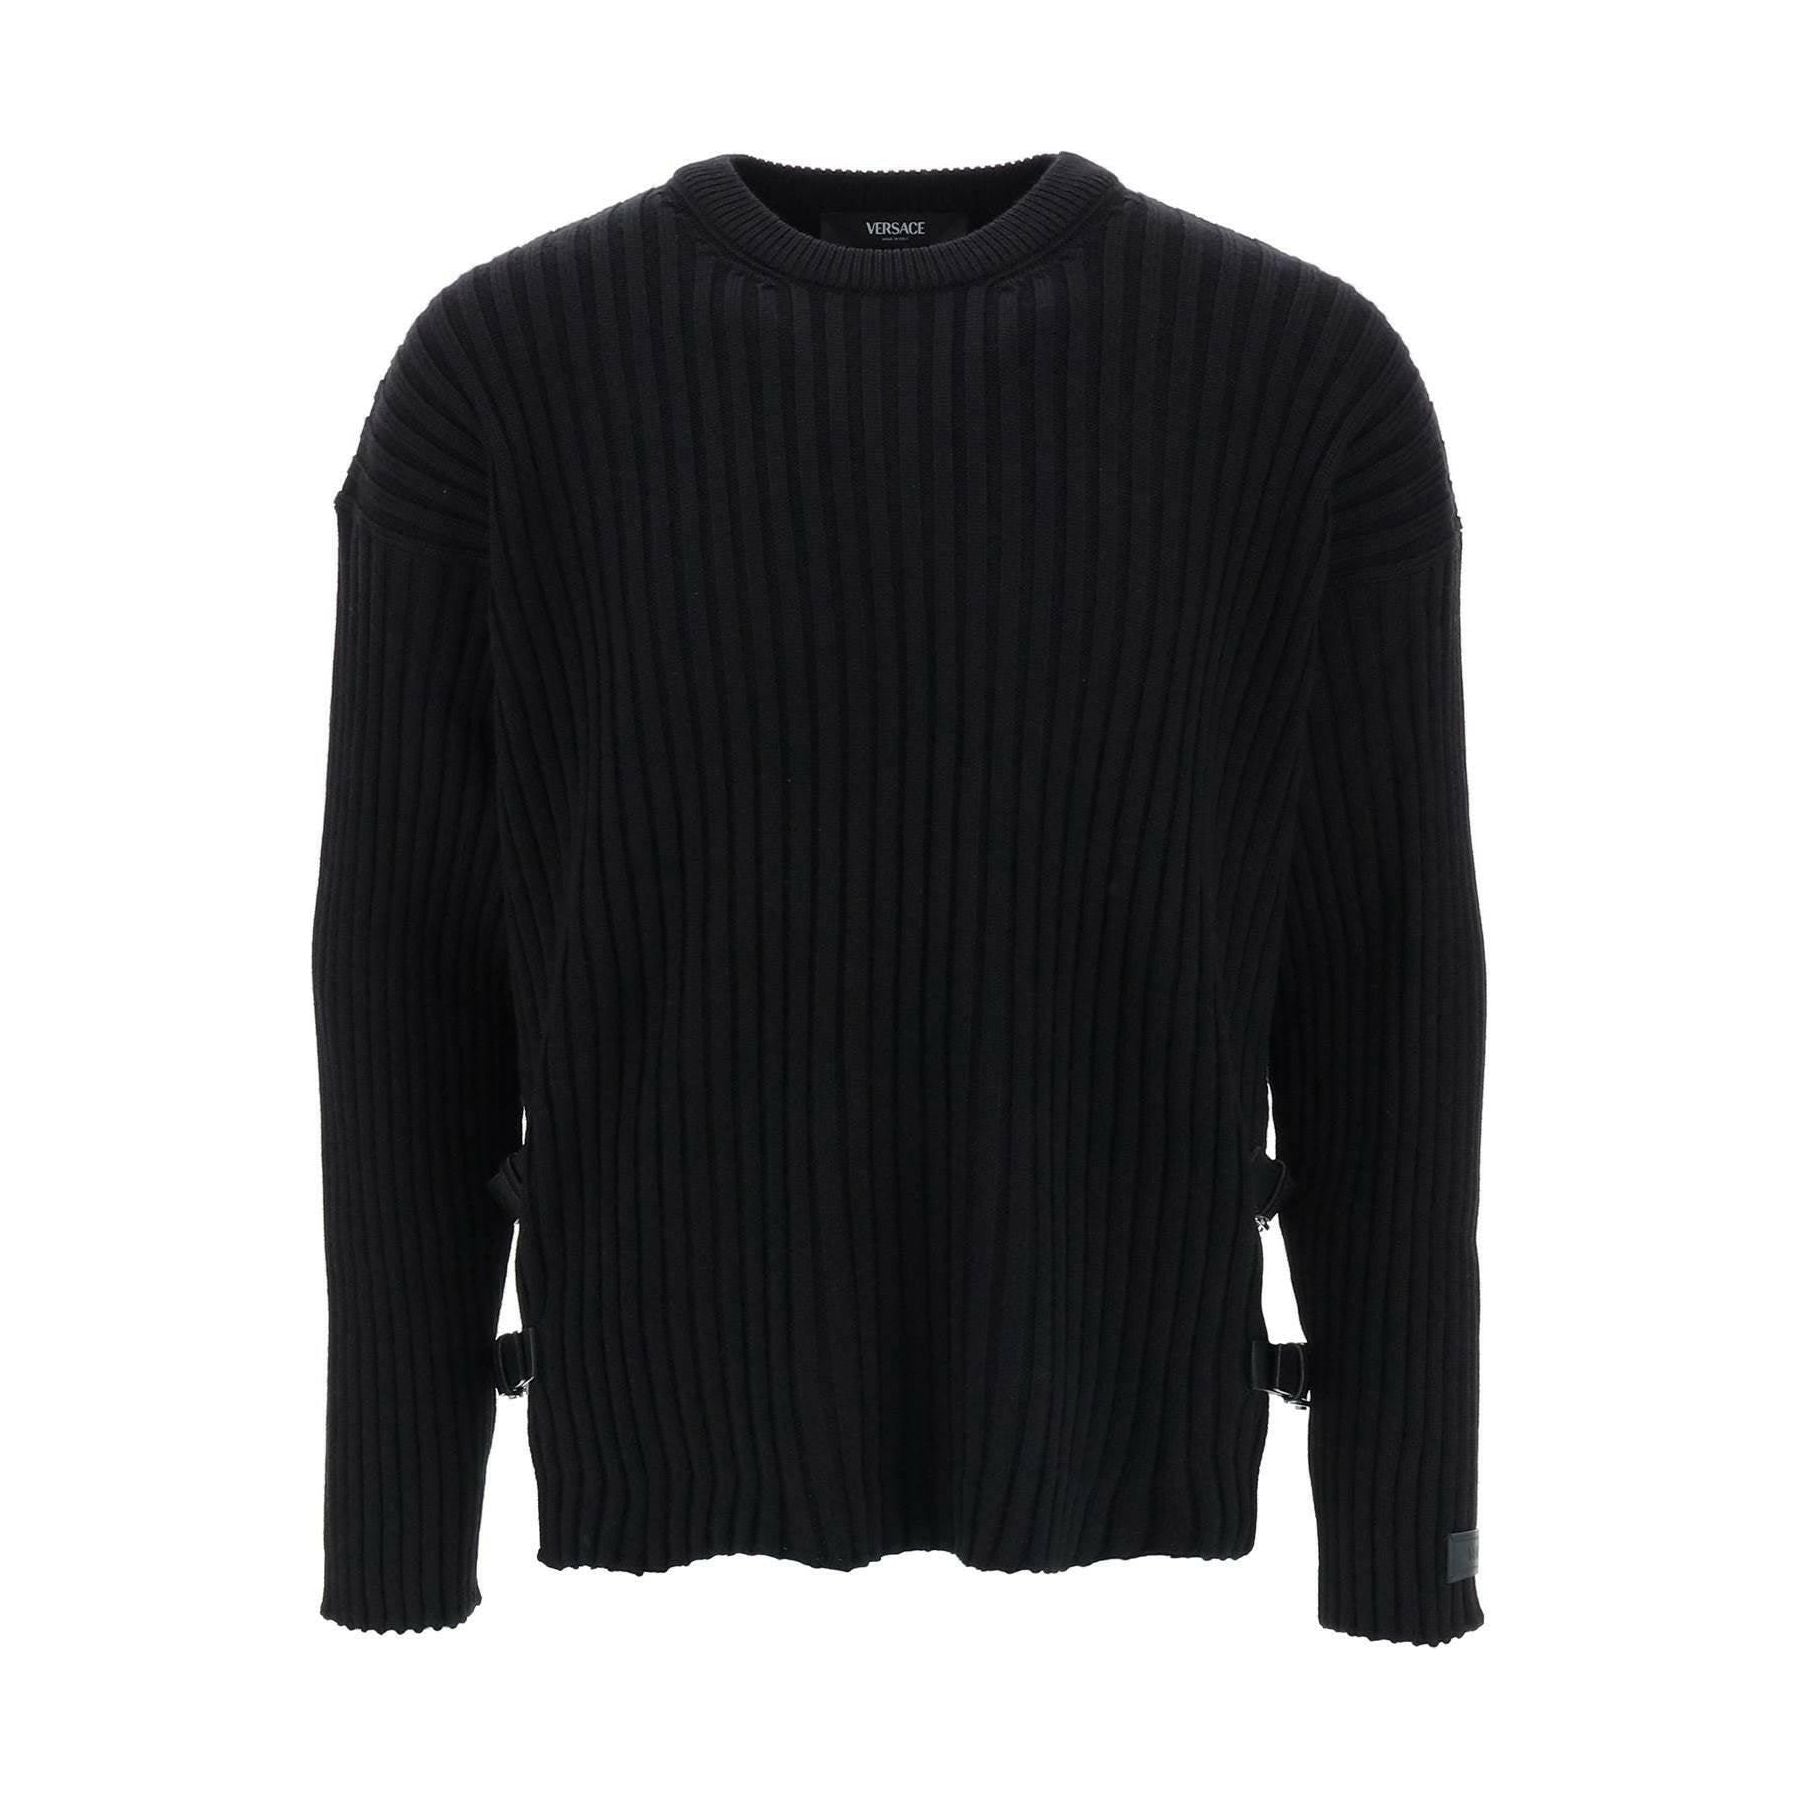 Ribbed Knit Sweater With Leather Straps VERSACE JOHN JULIA.